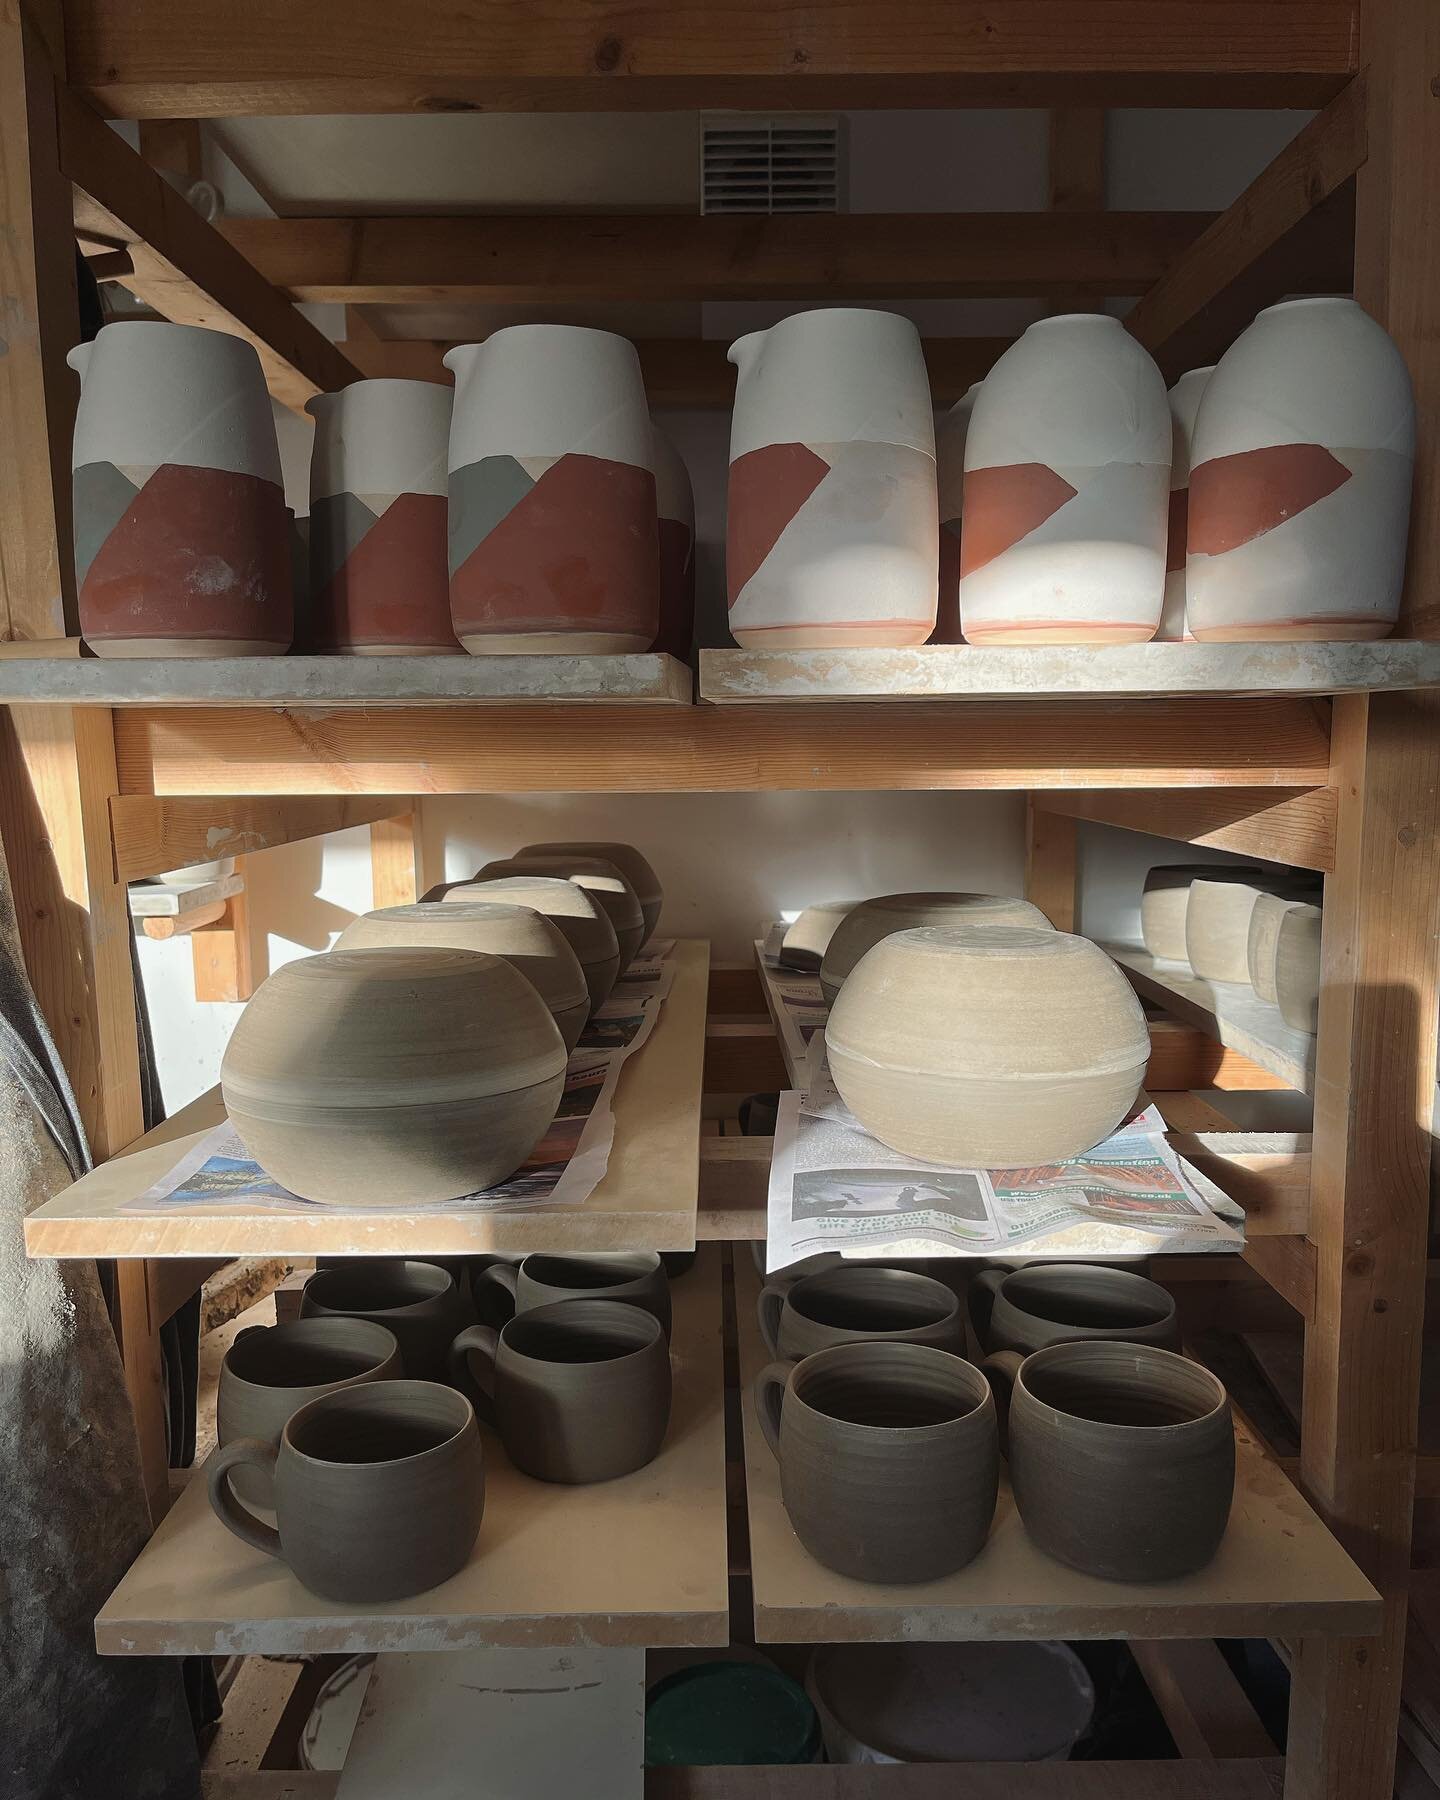 Many, many pots on the go at the moment - full shelves of greenware to be bisqued &amp; bisqueware to be glazed &amp; glazed pots to be sanded &amp; clay balls to be thrown into pots etc!

Hope lots of you have got pottery on your wish list this year